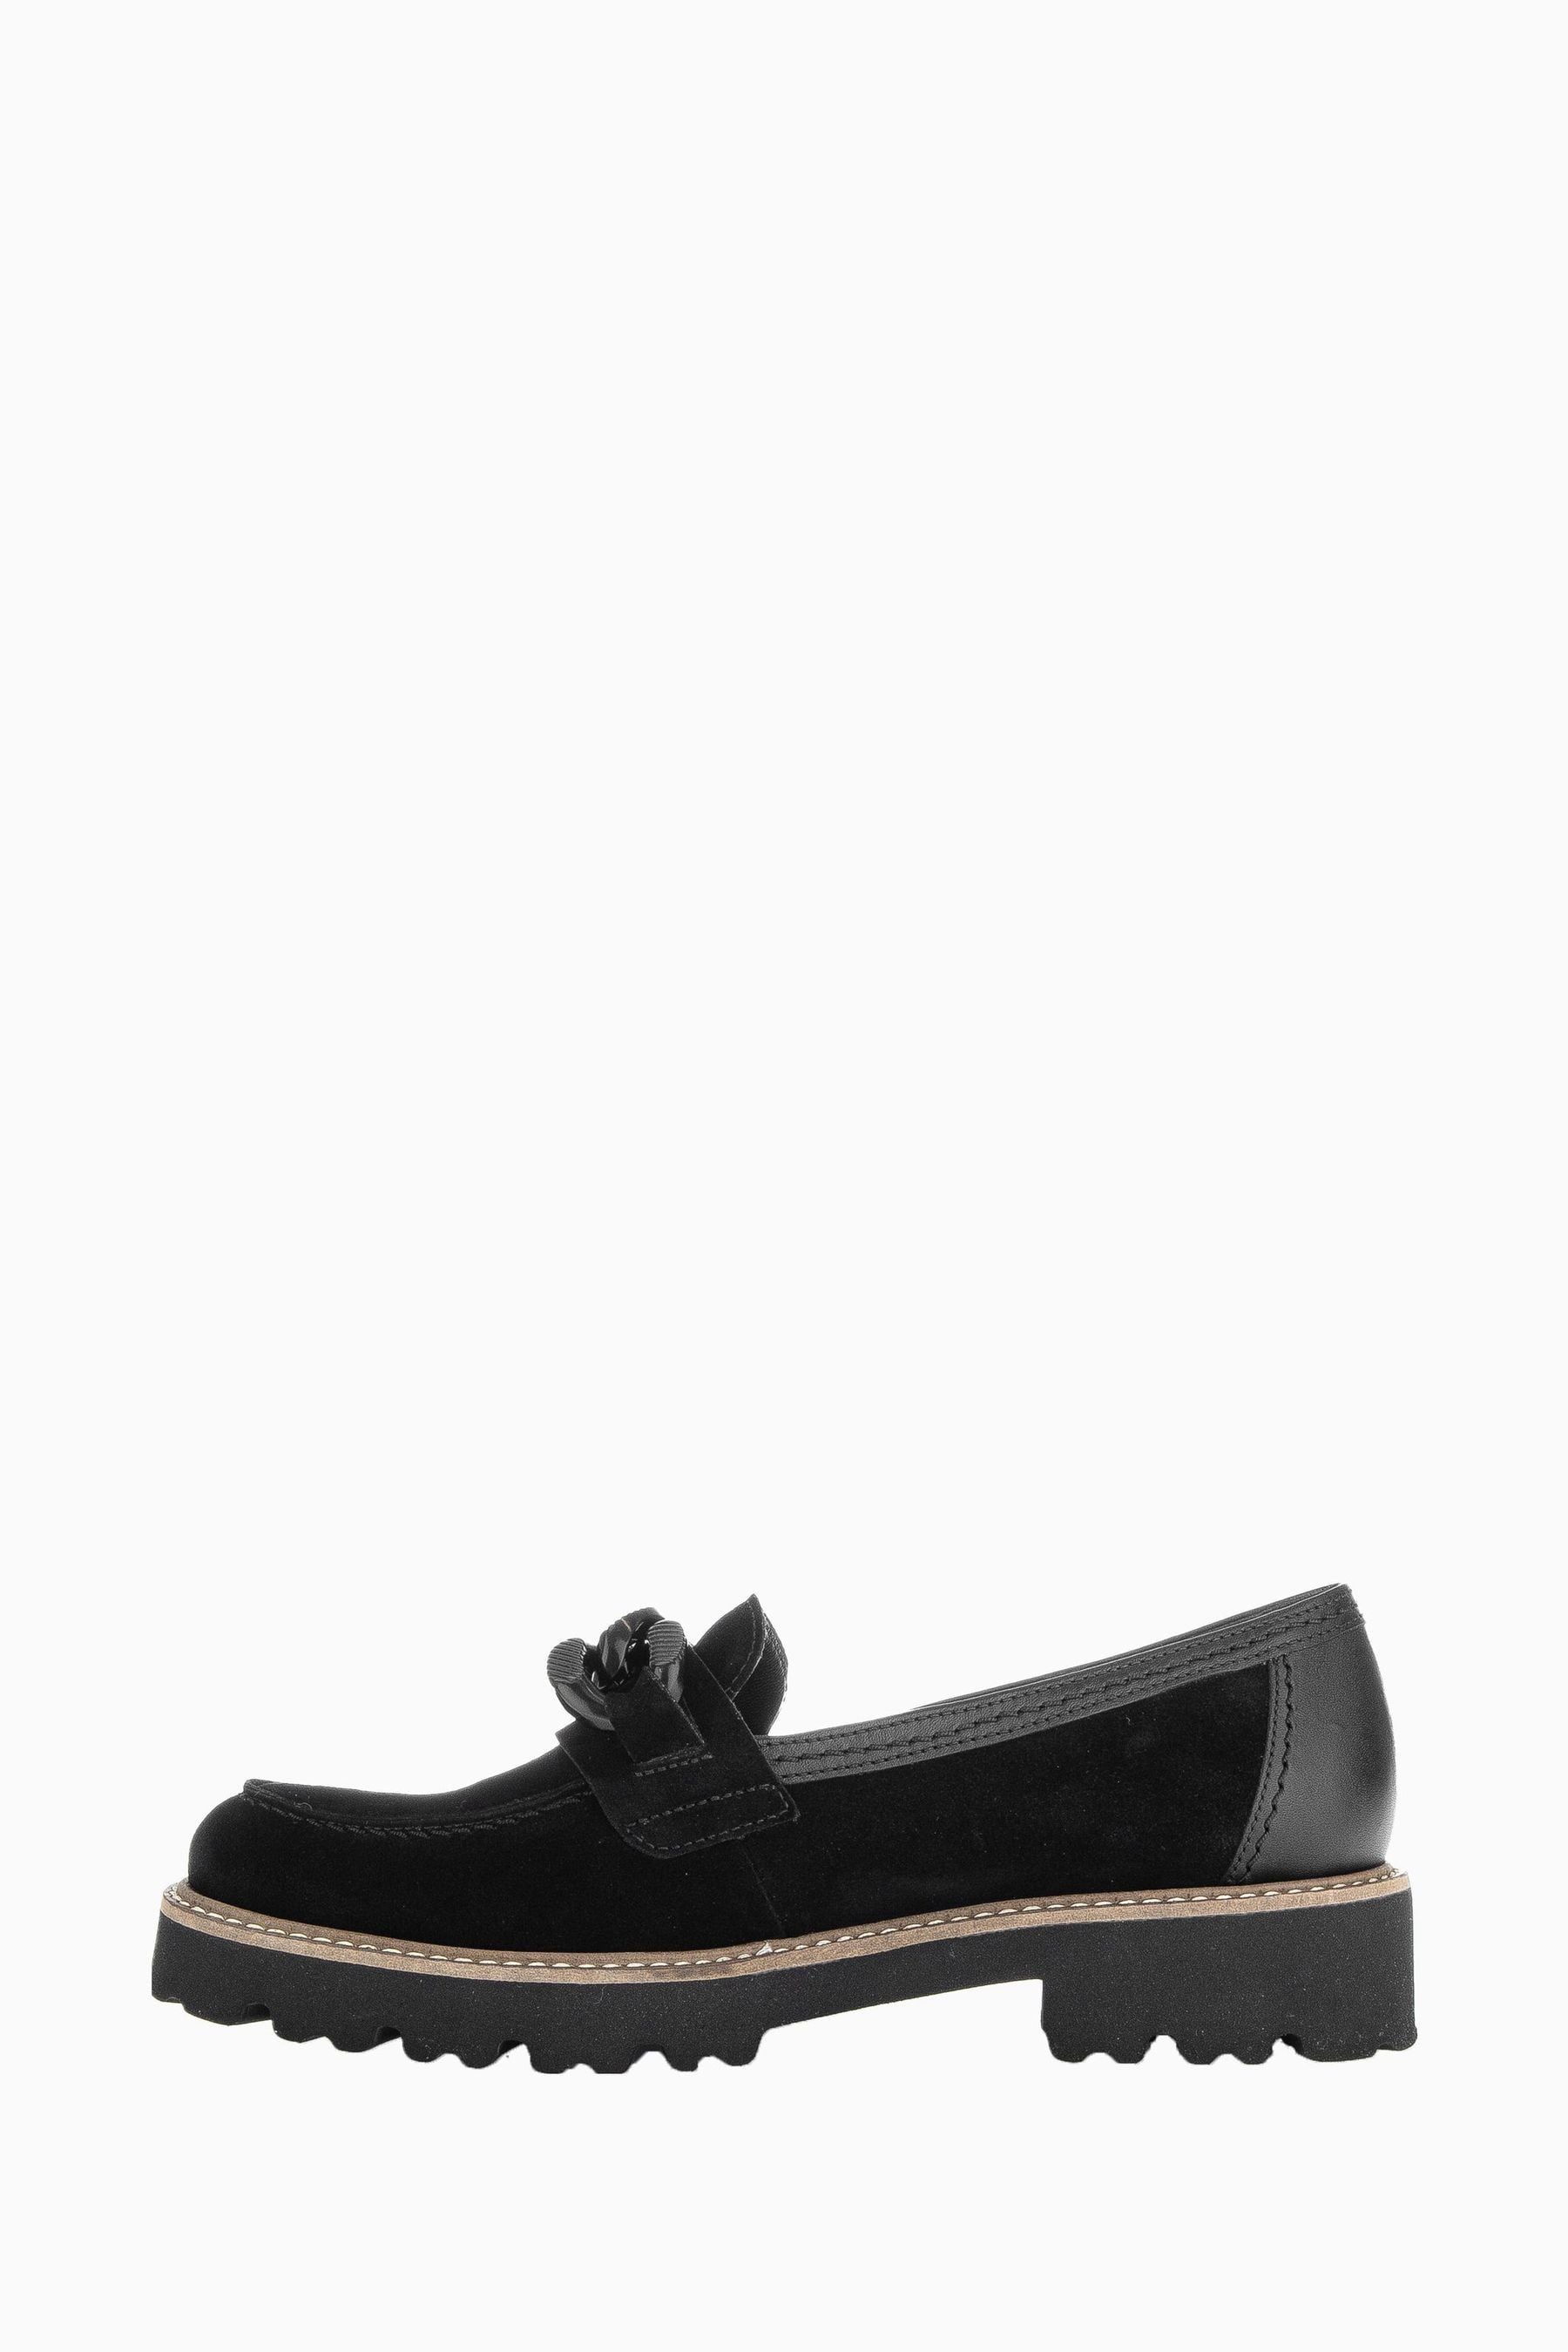 Buy Gabor Squeeze Suede Black Loafers from the Next UK online shop